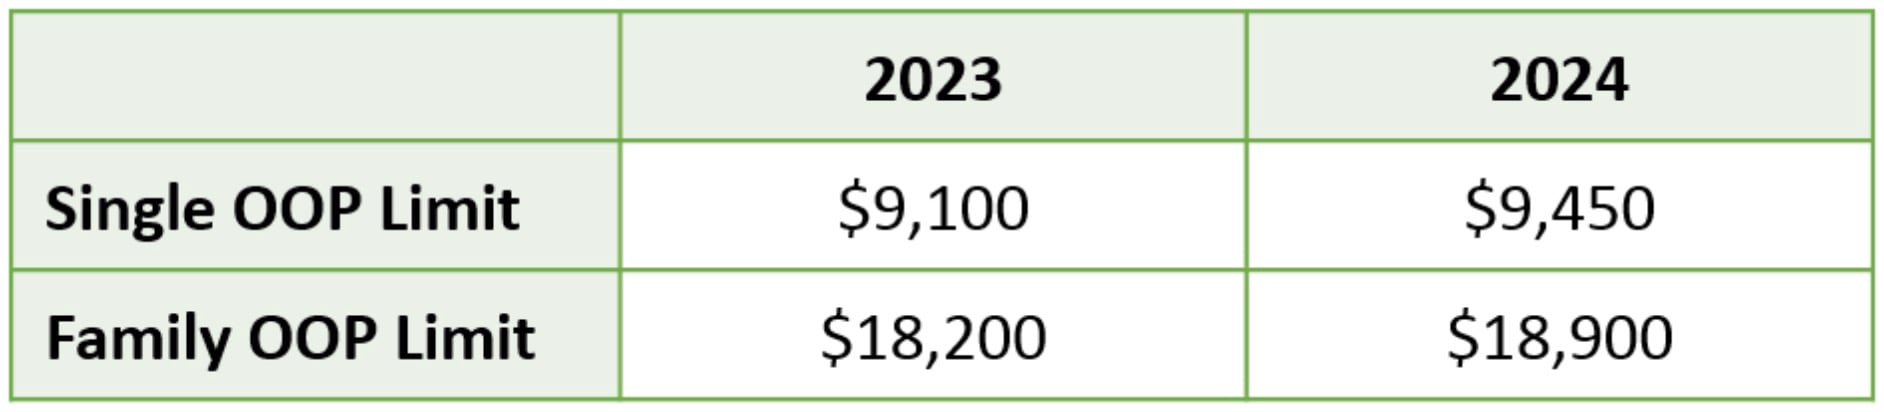 HSA and ACA Limits for 2024 Chart 2